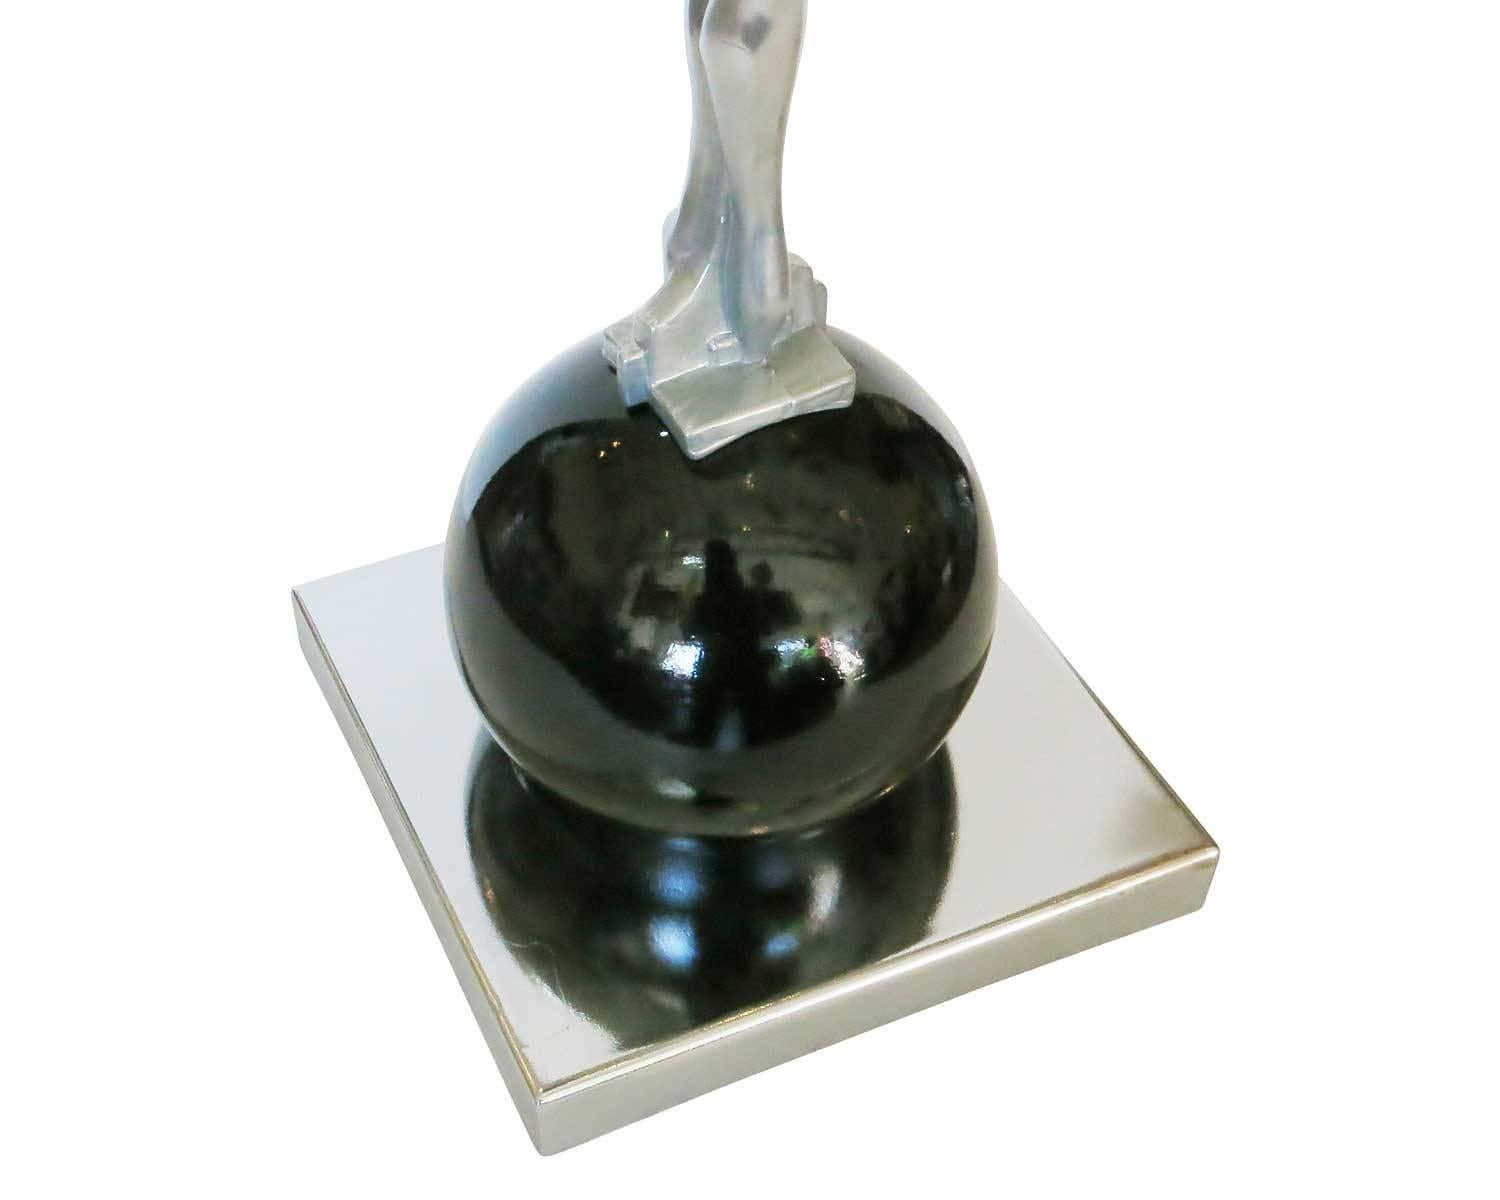 Frankart Style Silvertone and Onyx Nude Figural Cocktail Smoker Ashtray 3